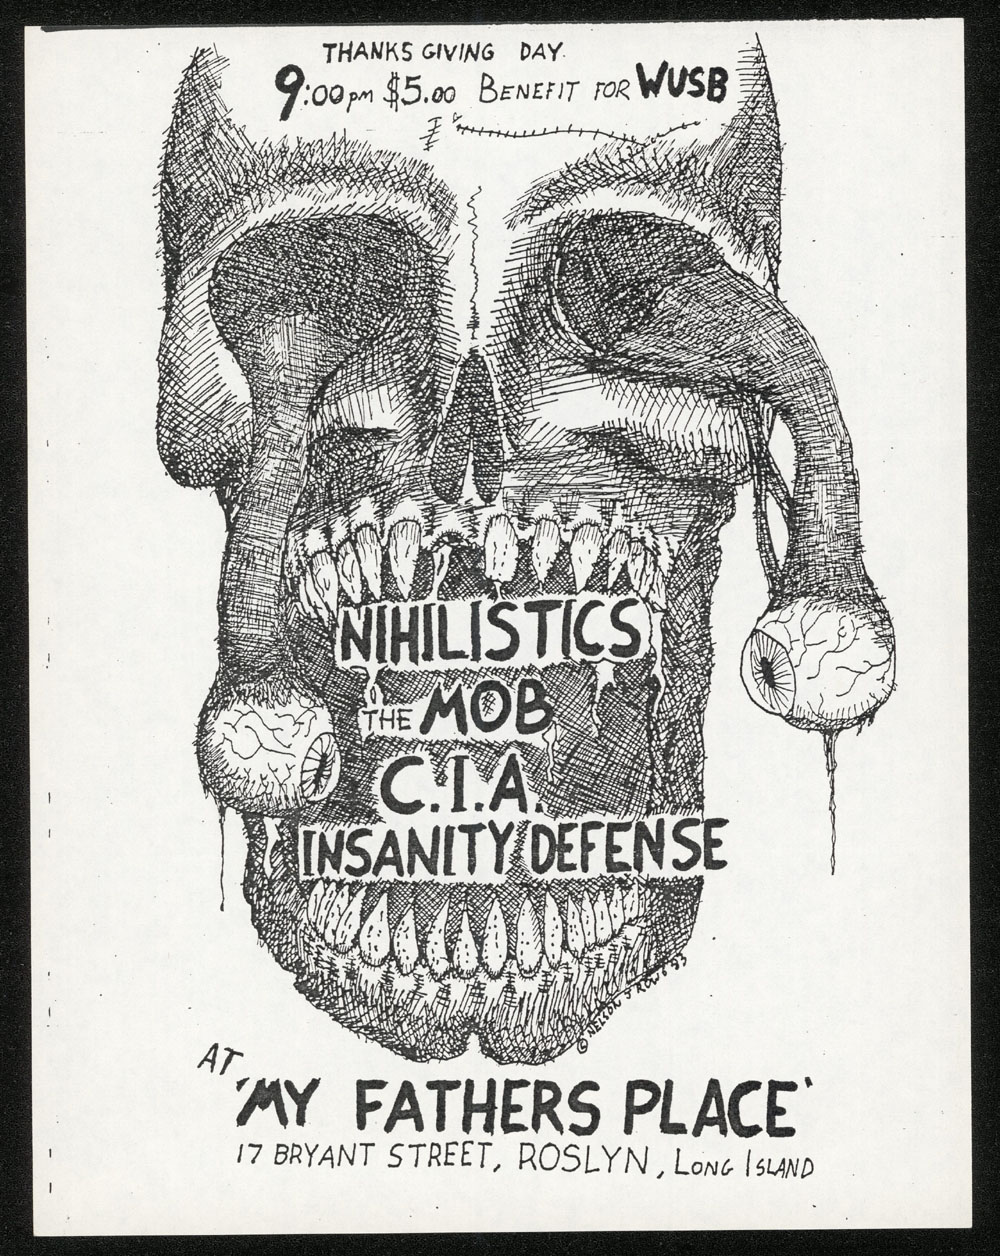 NIHILISTICS w/ The Mob, CIA, Insanity Defense at My Father's Place